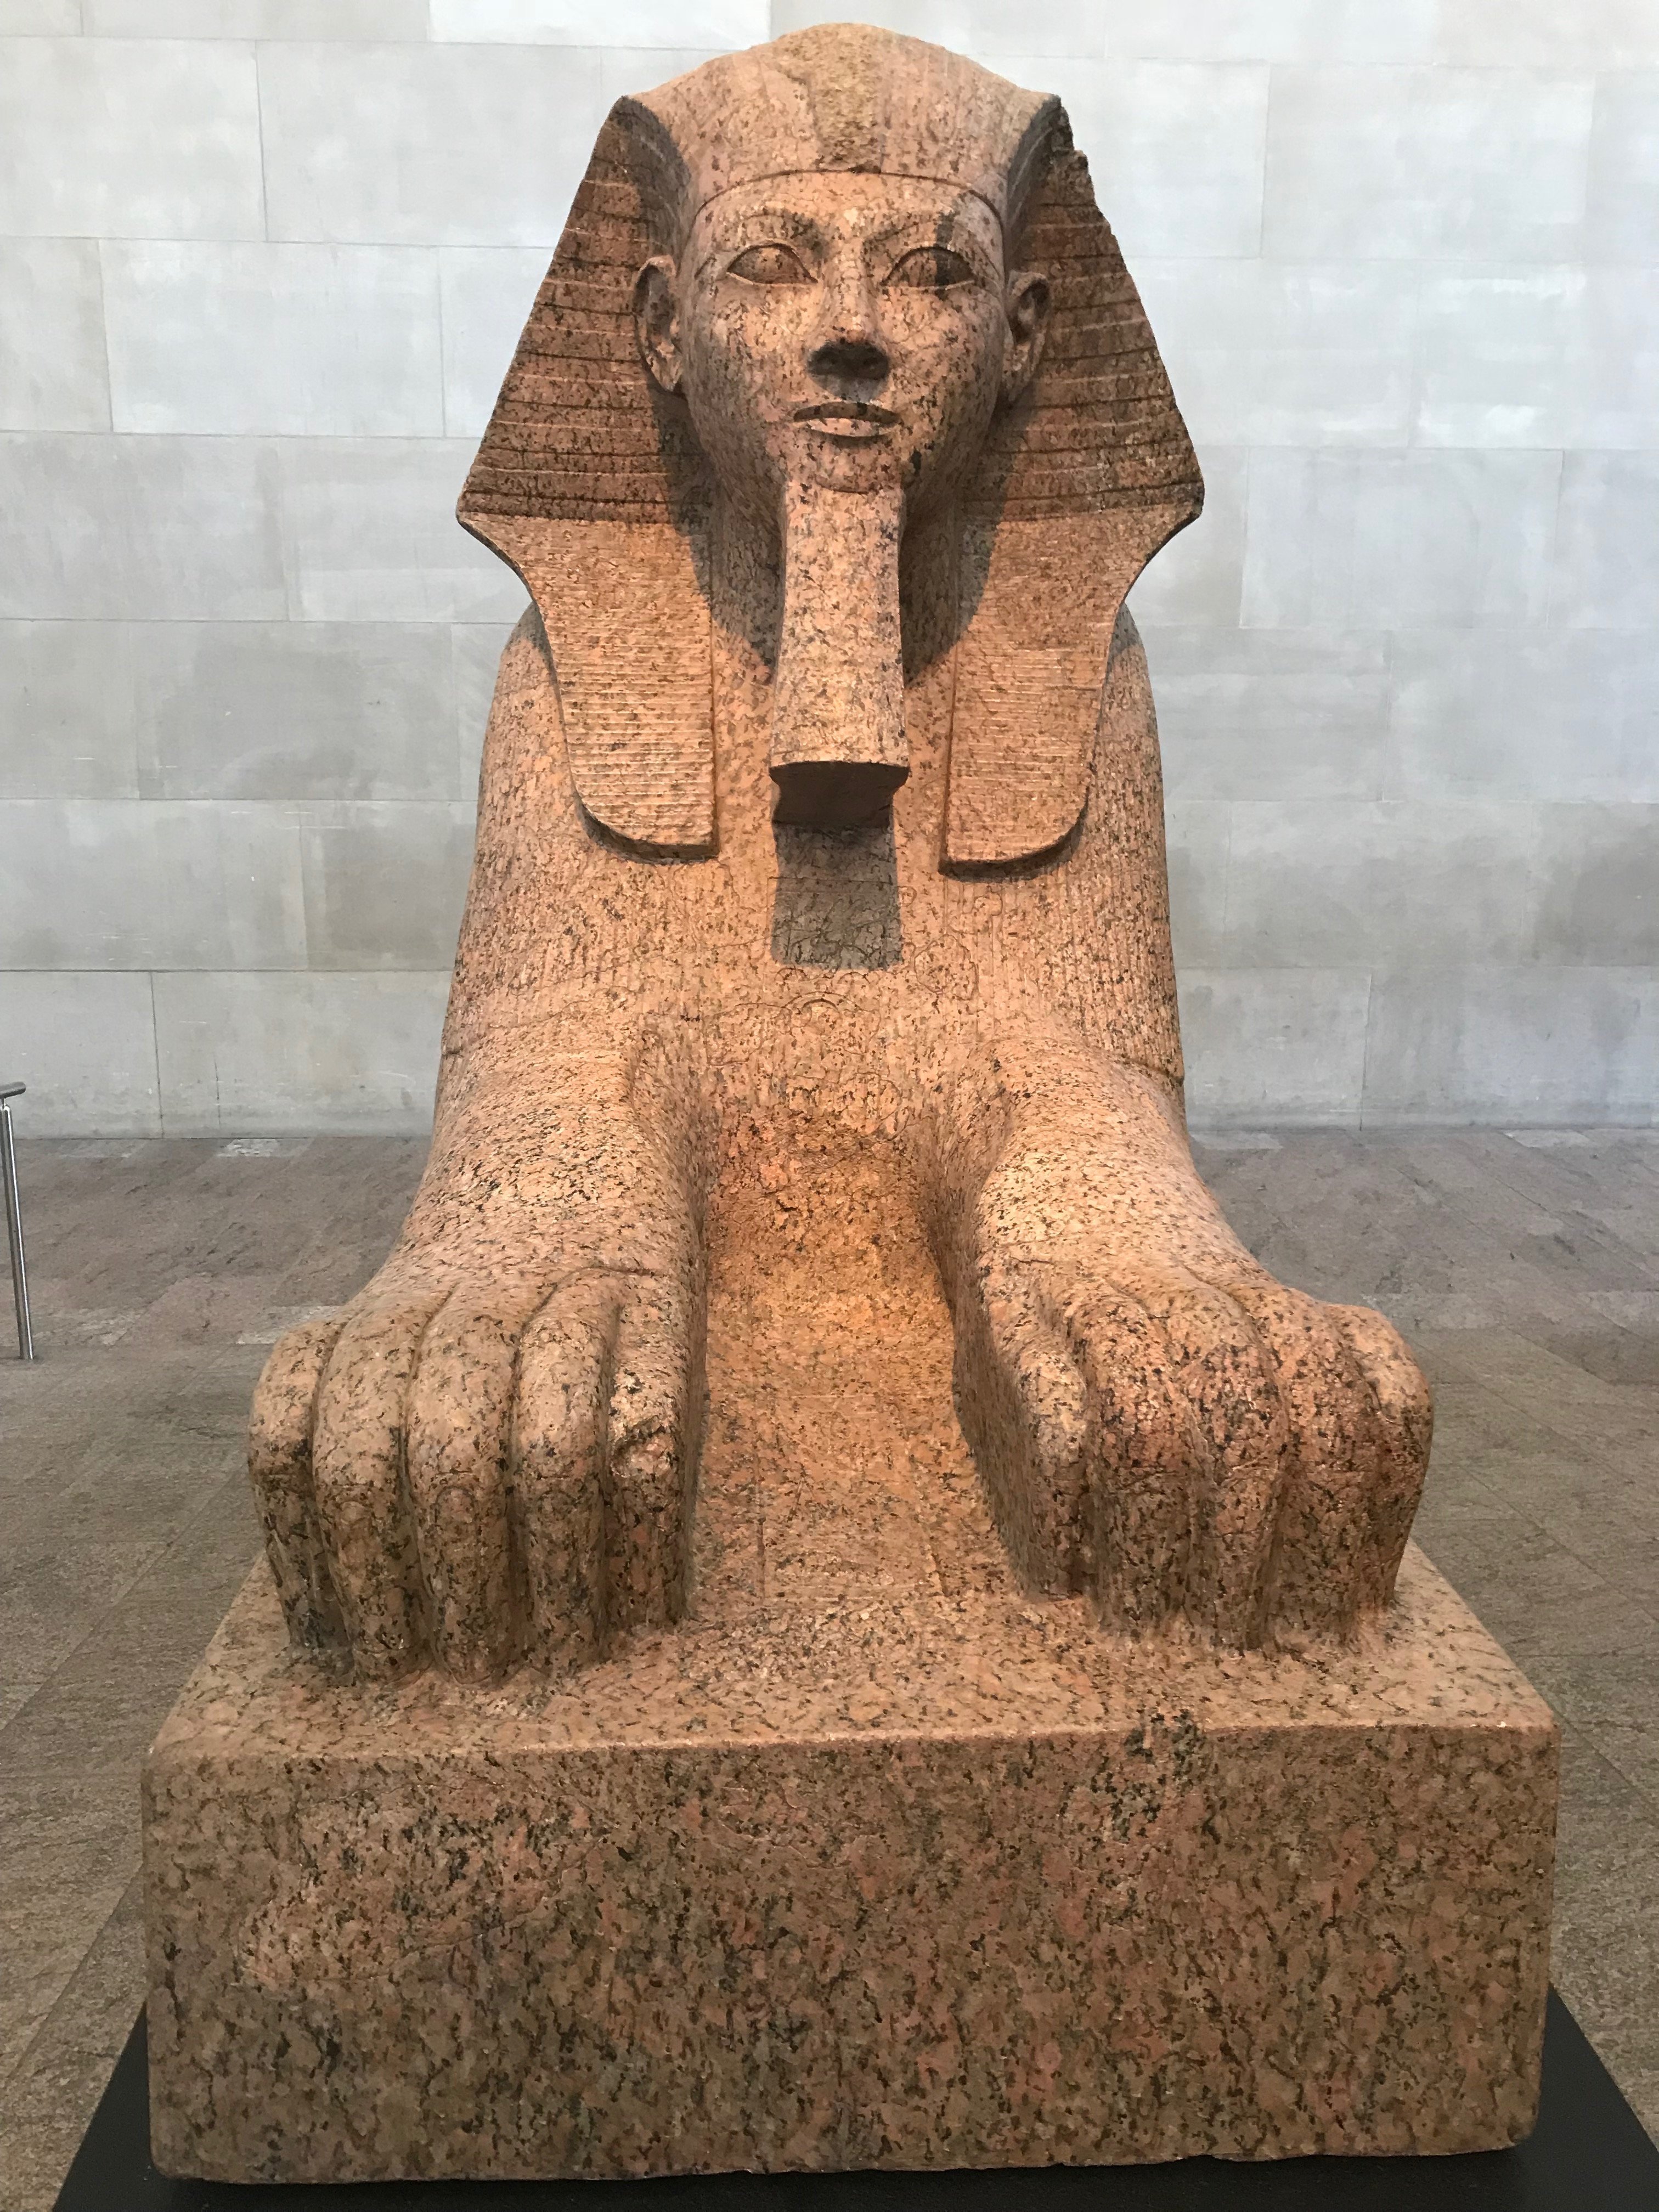 Statue of a sphinx at the Sackler Gallery in the Metropolitan Museum of Art in New York City. (DCNF/Ethan Barton)